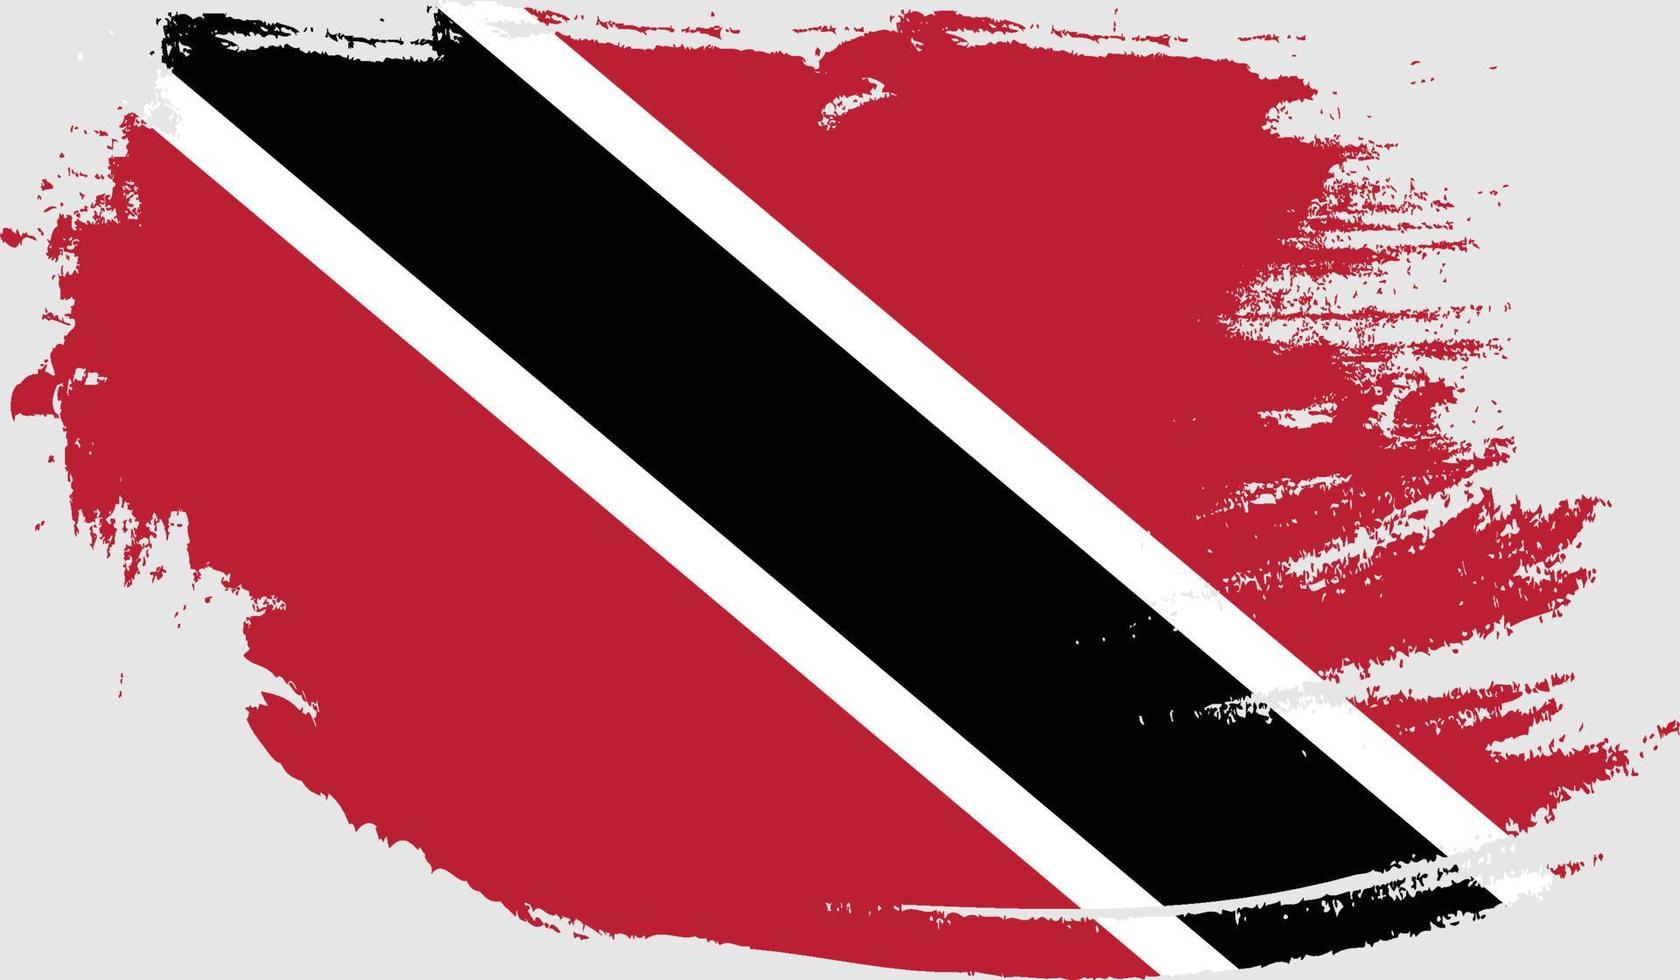 Trinidad and Tobago flag with grunge texture vector